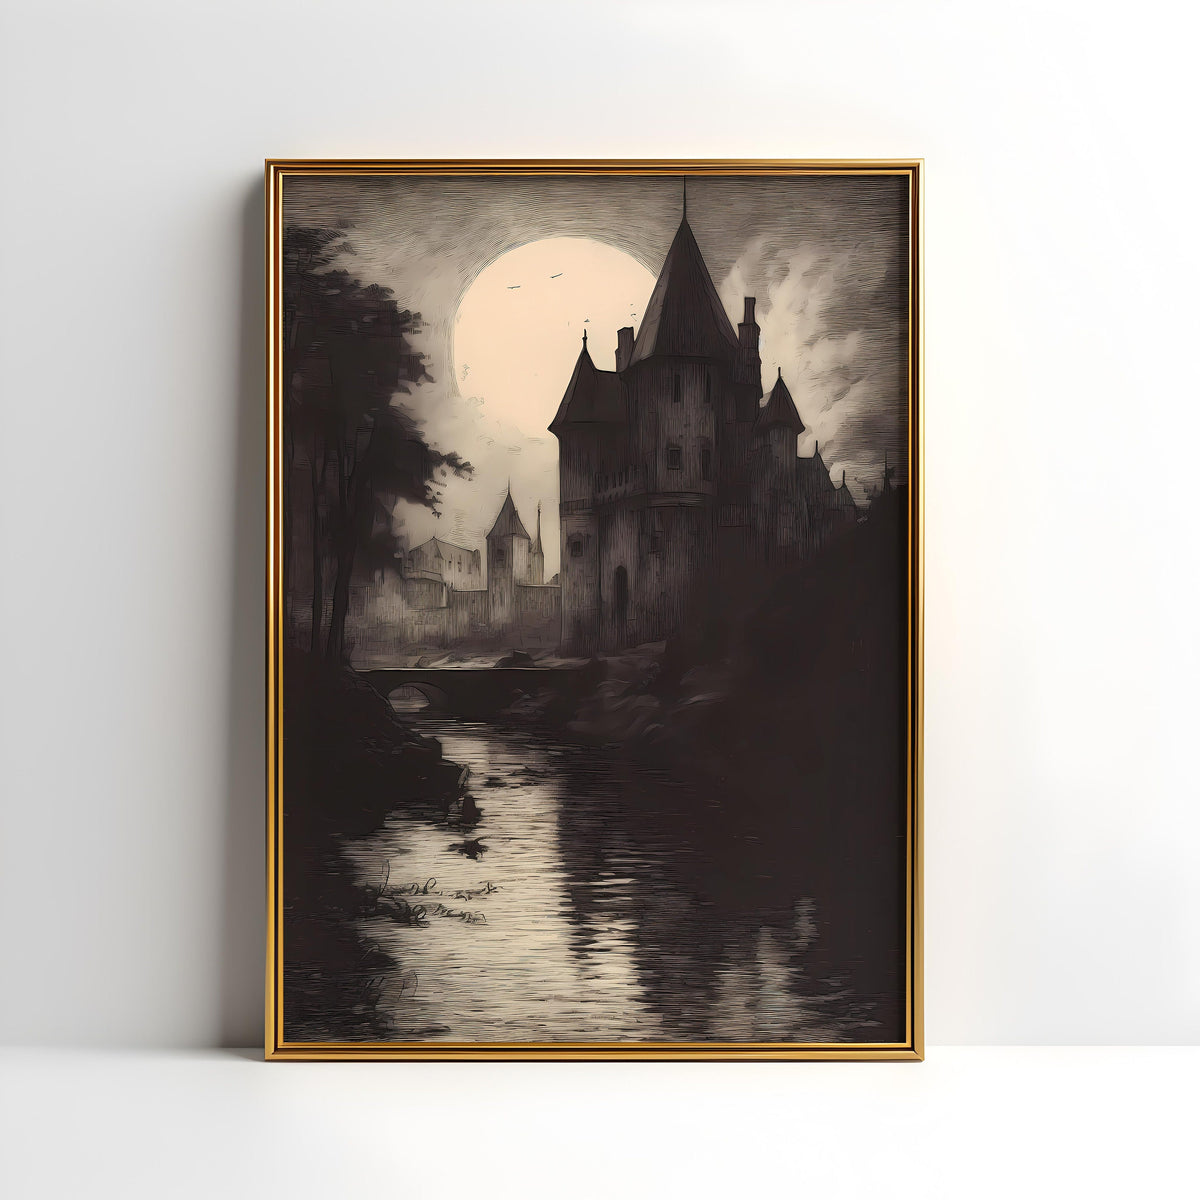 a black and white painting of a castle by a river